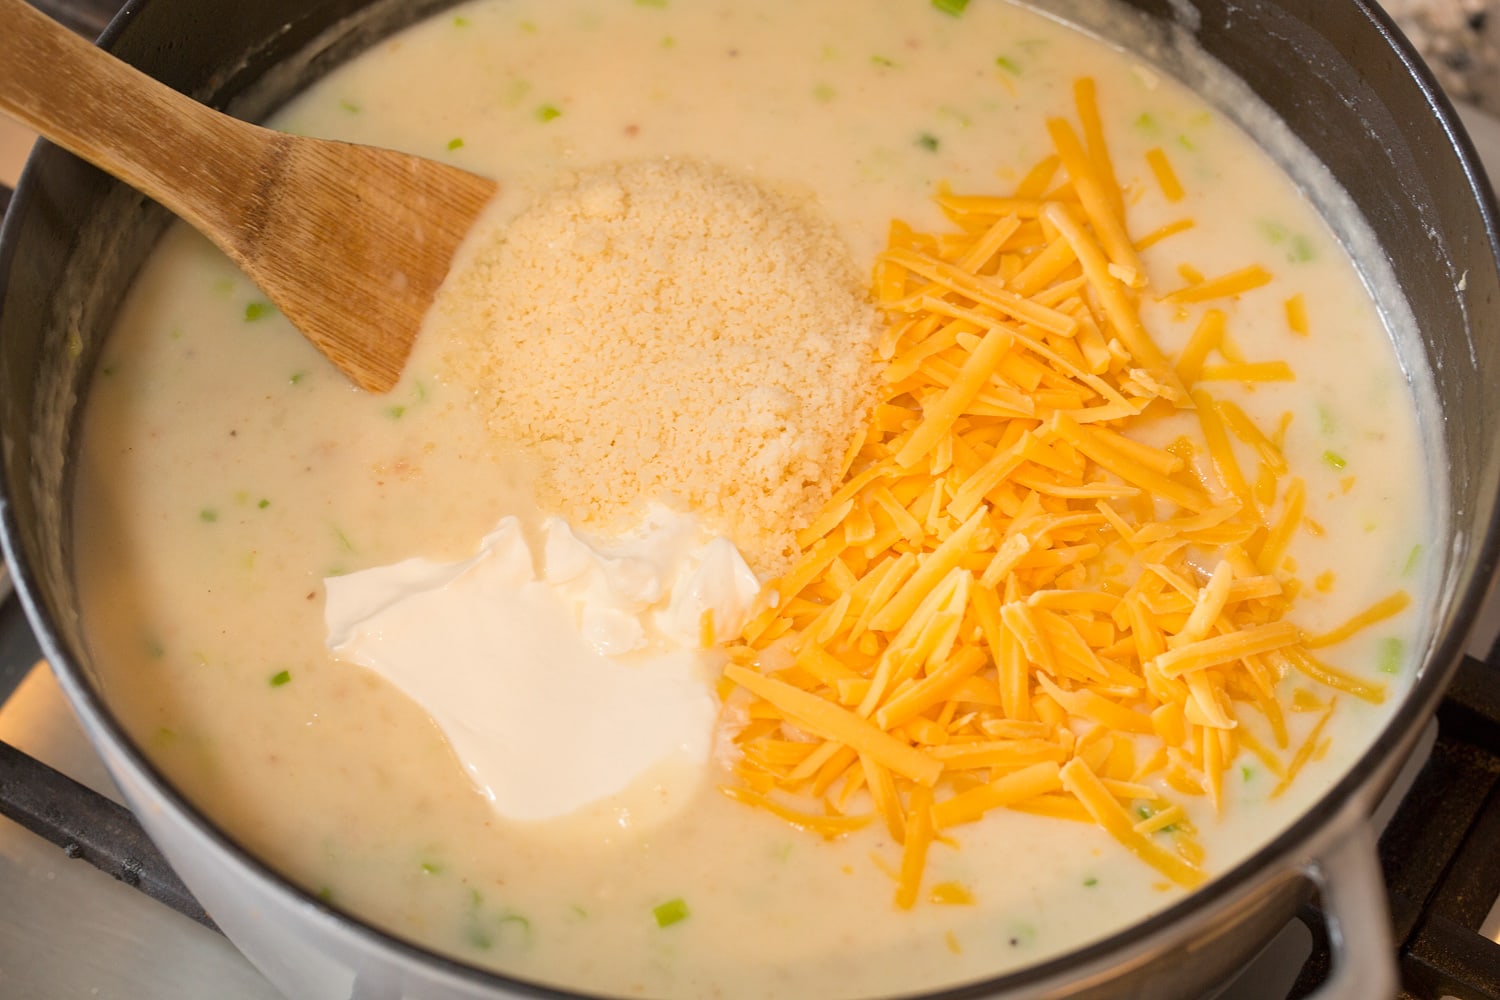 Adding cheeses and sour cream to soup.